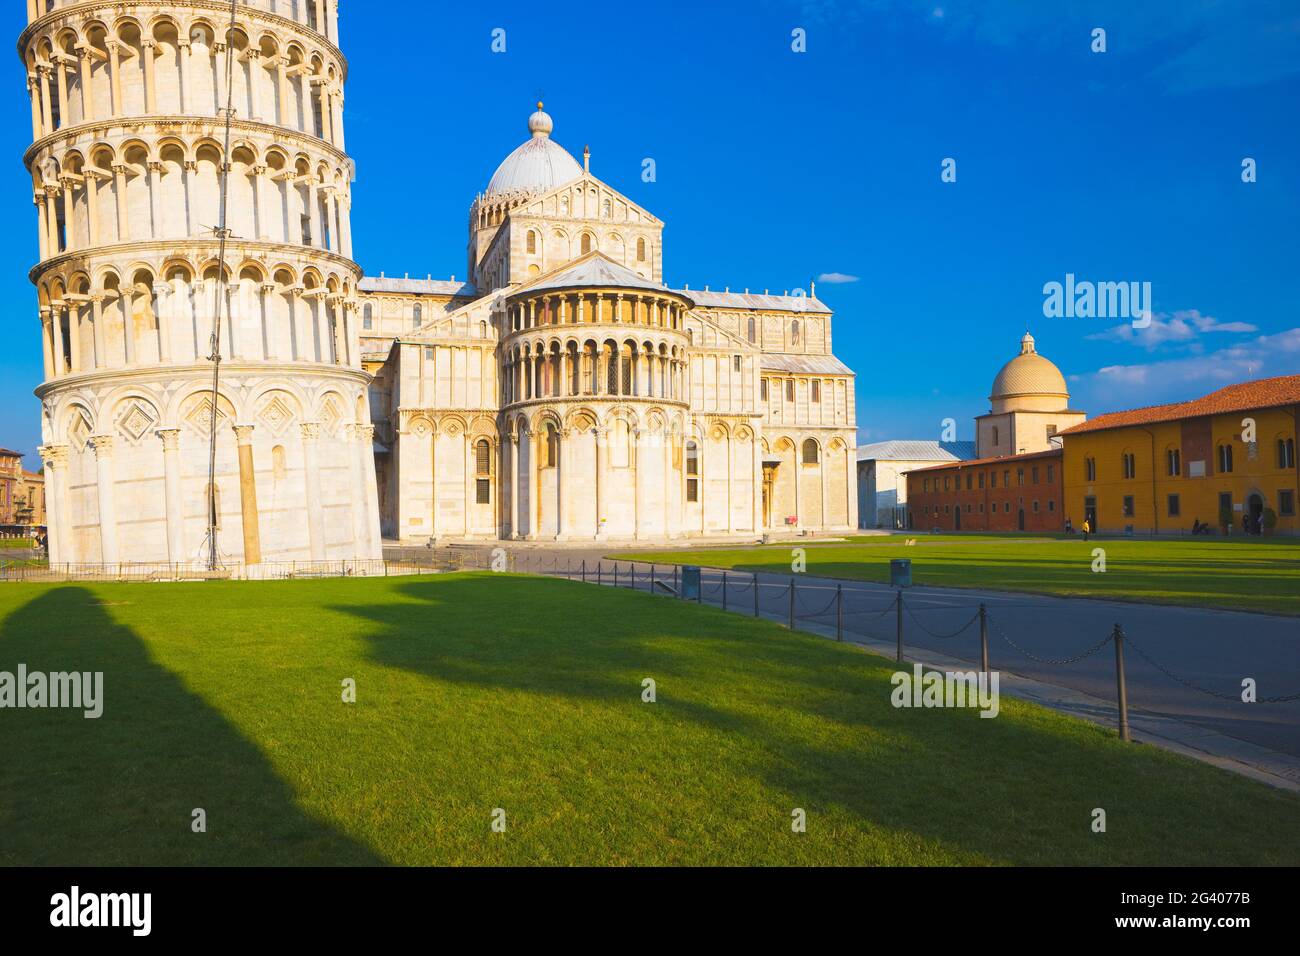 The leaning Tower of Pisa beside the Cathedral, Pisa, Italy Stock Photo